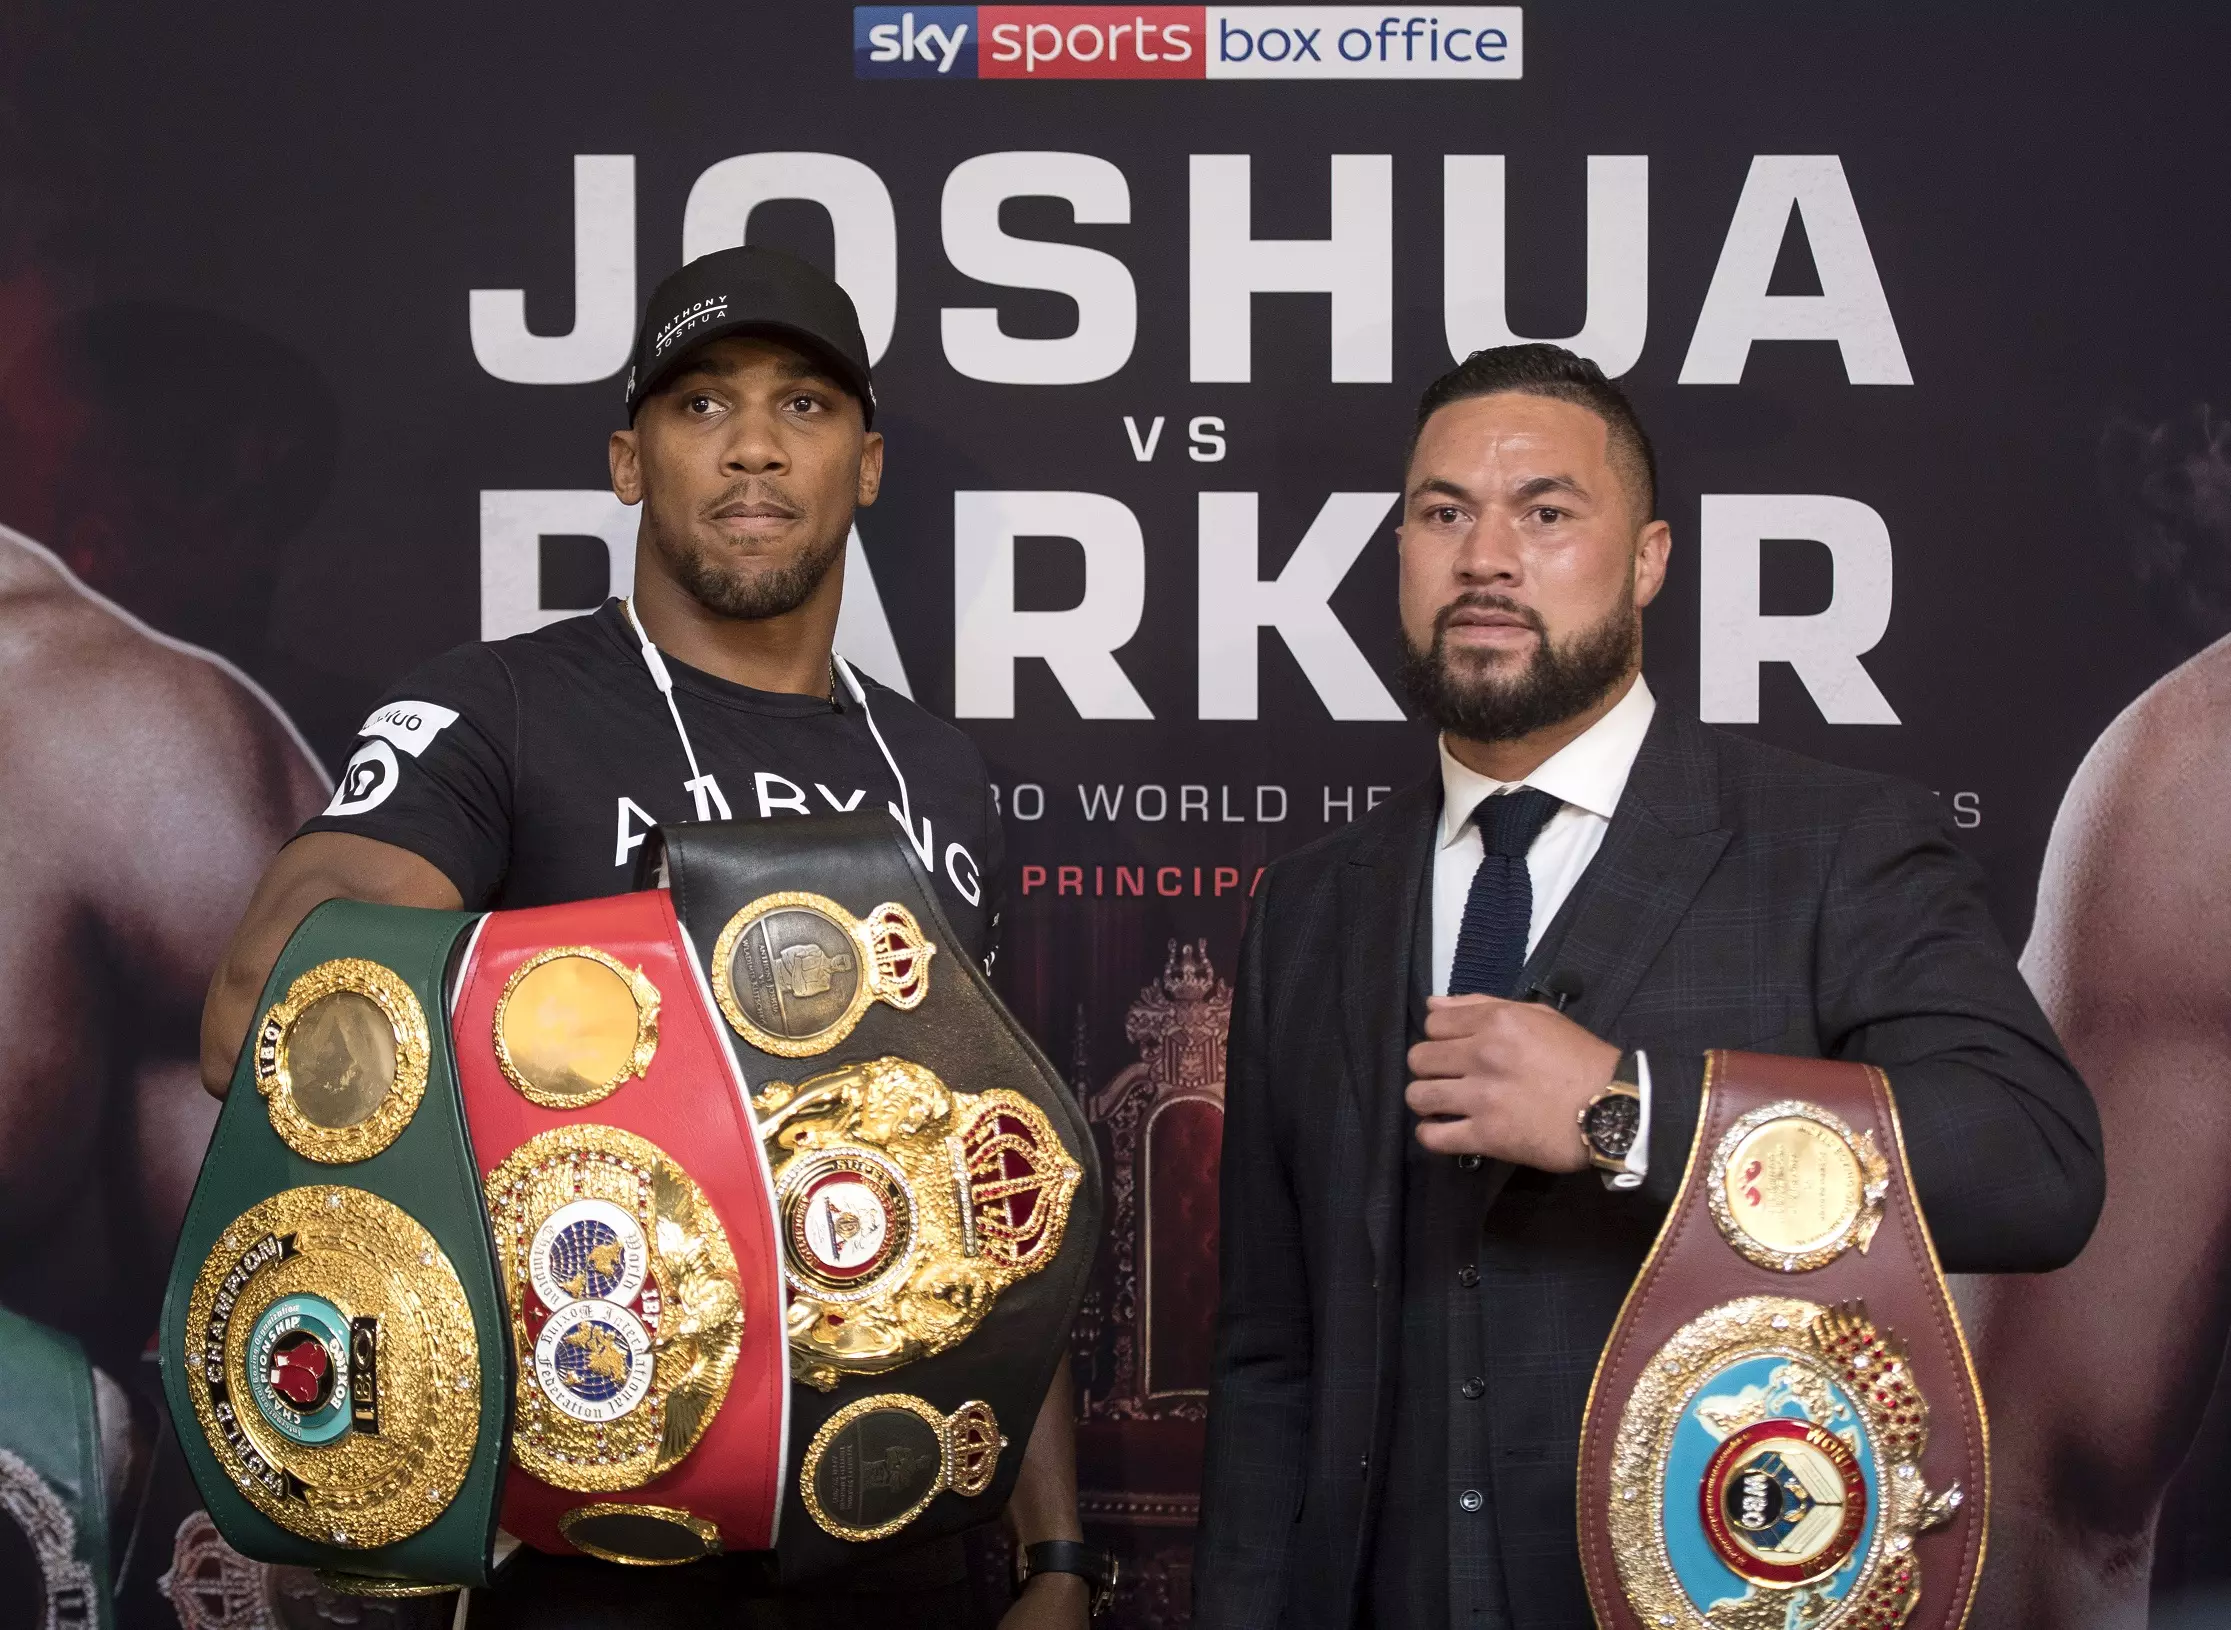 Joshua vs Parker is expected to be a good fight.